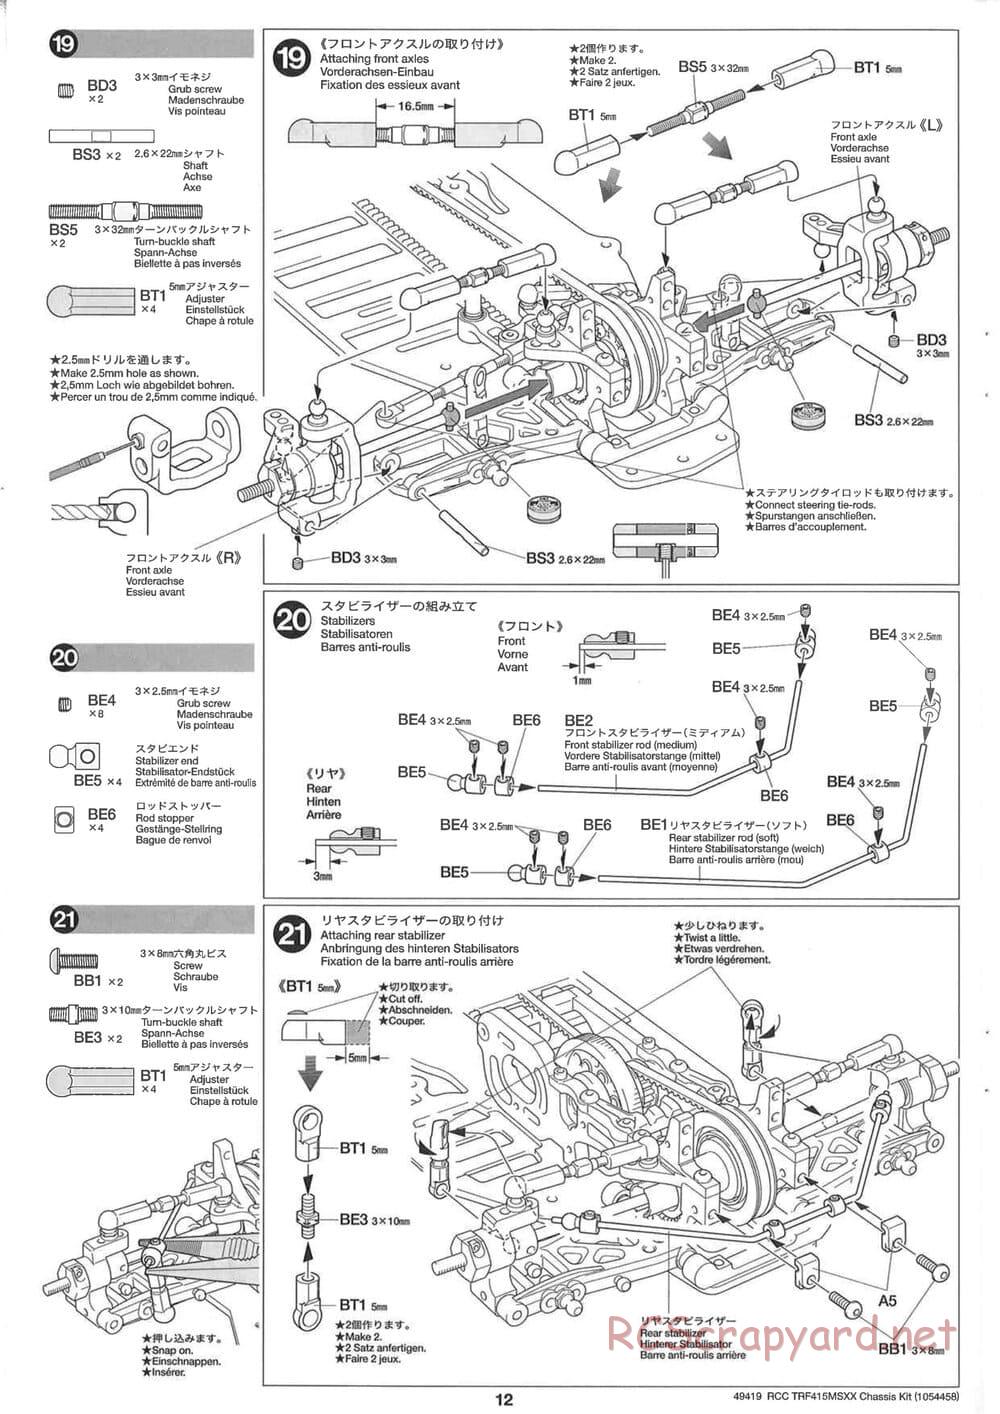 Tamiya - TRF415-MSXX Chassis - Manual - Page 12